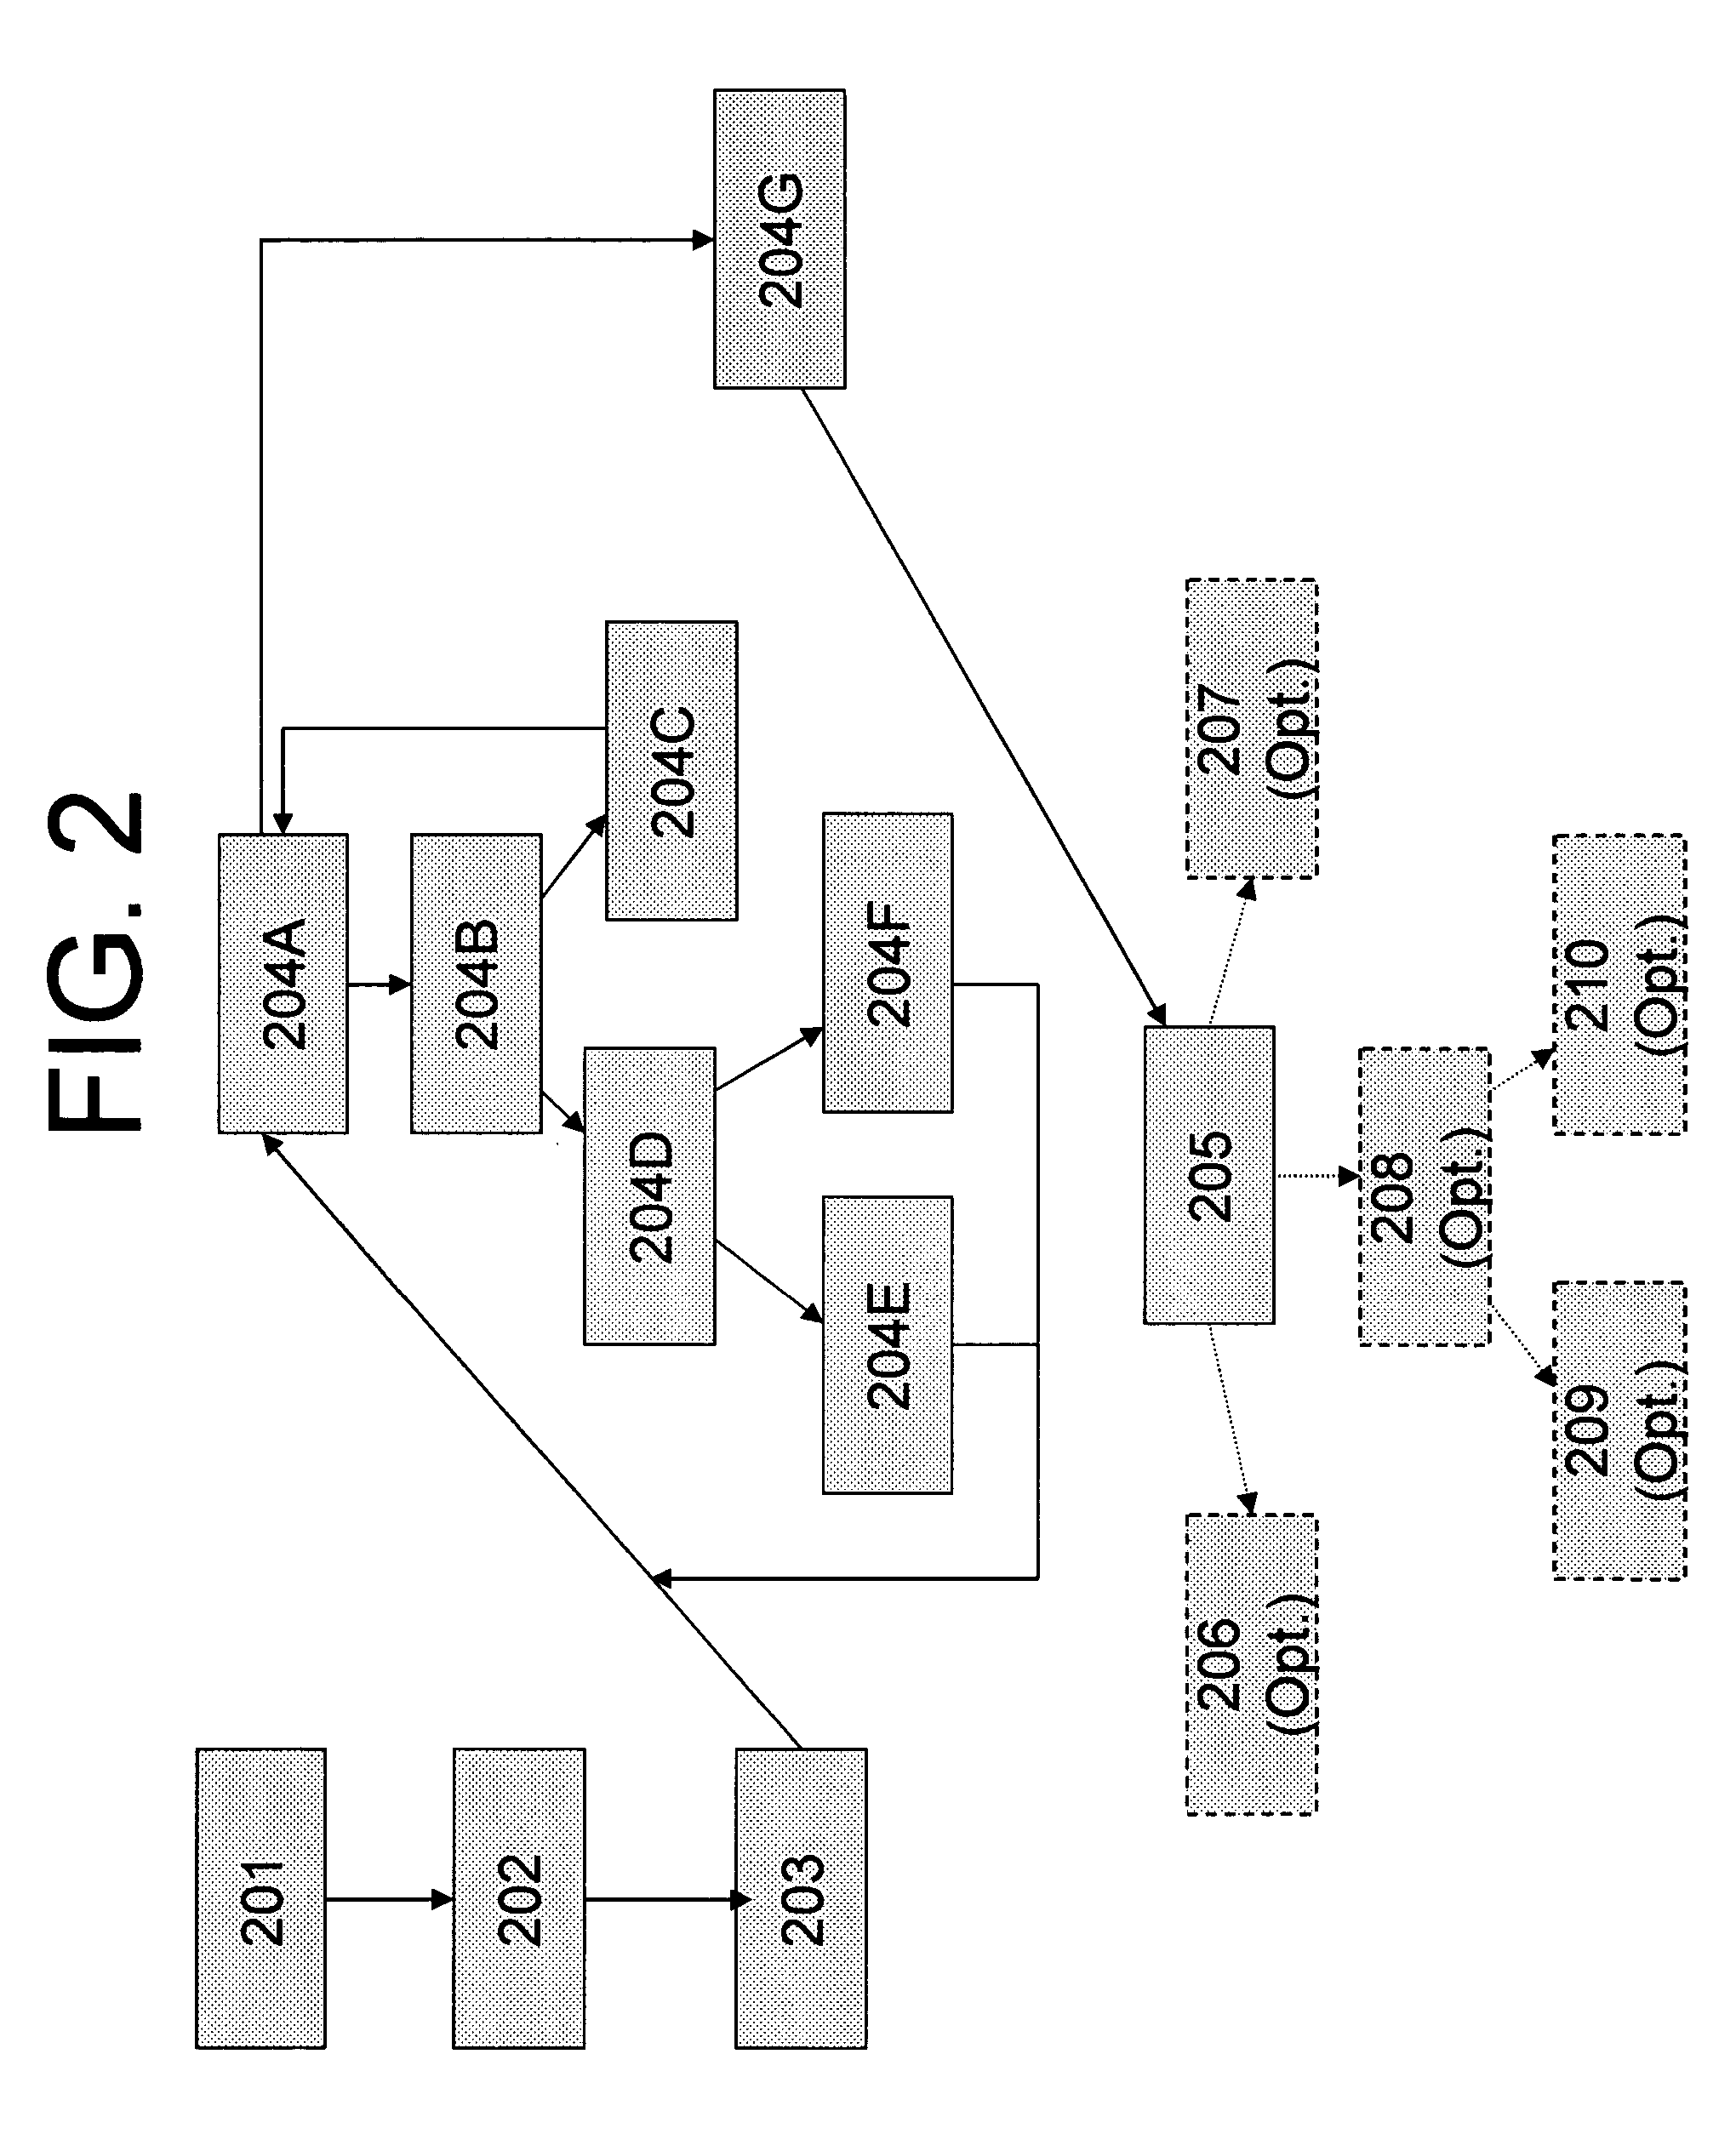 System and method for verifying the accurate processing of medical insurance claims